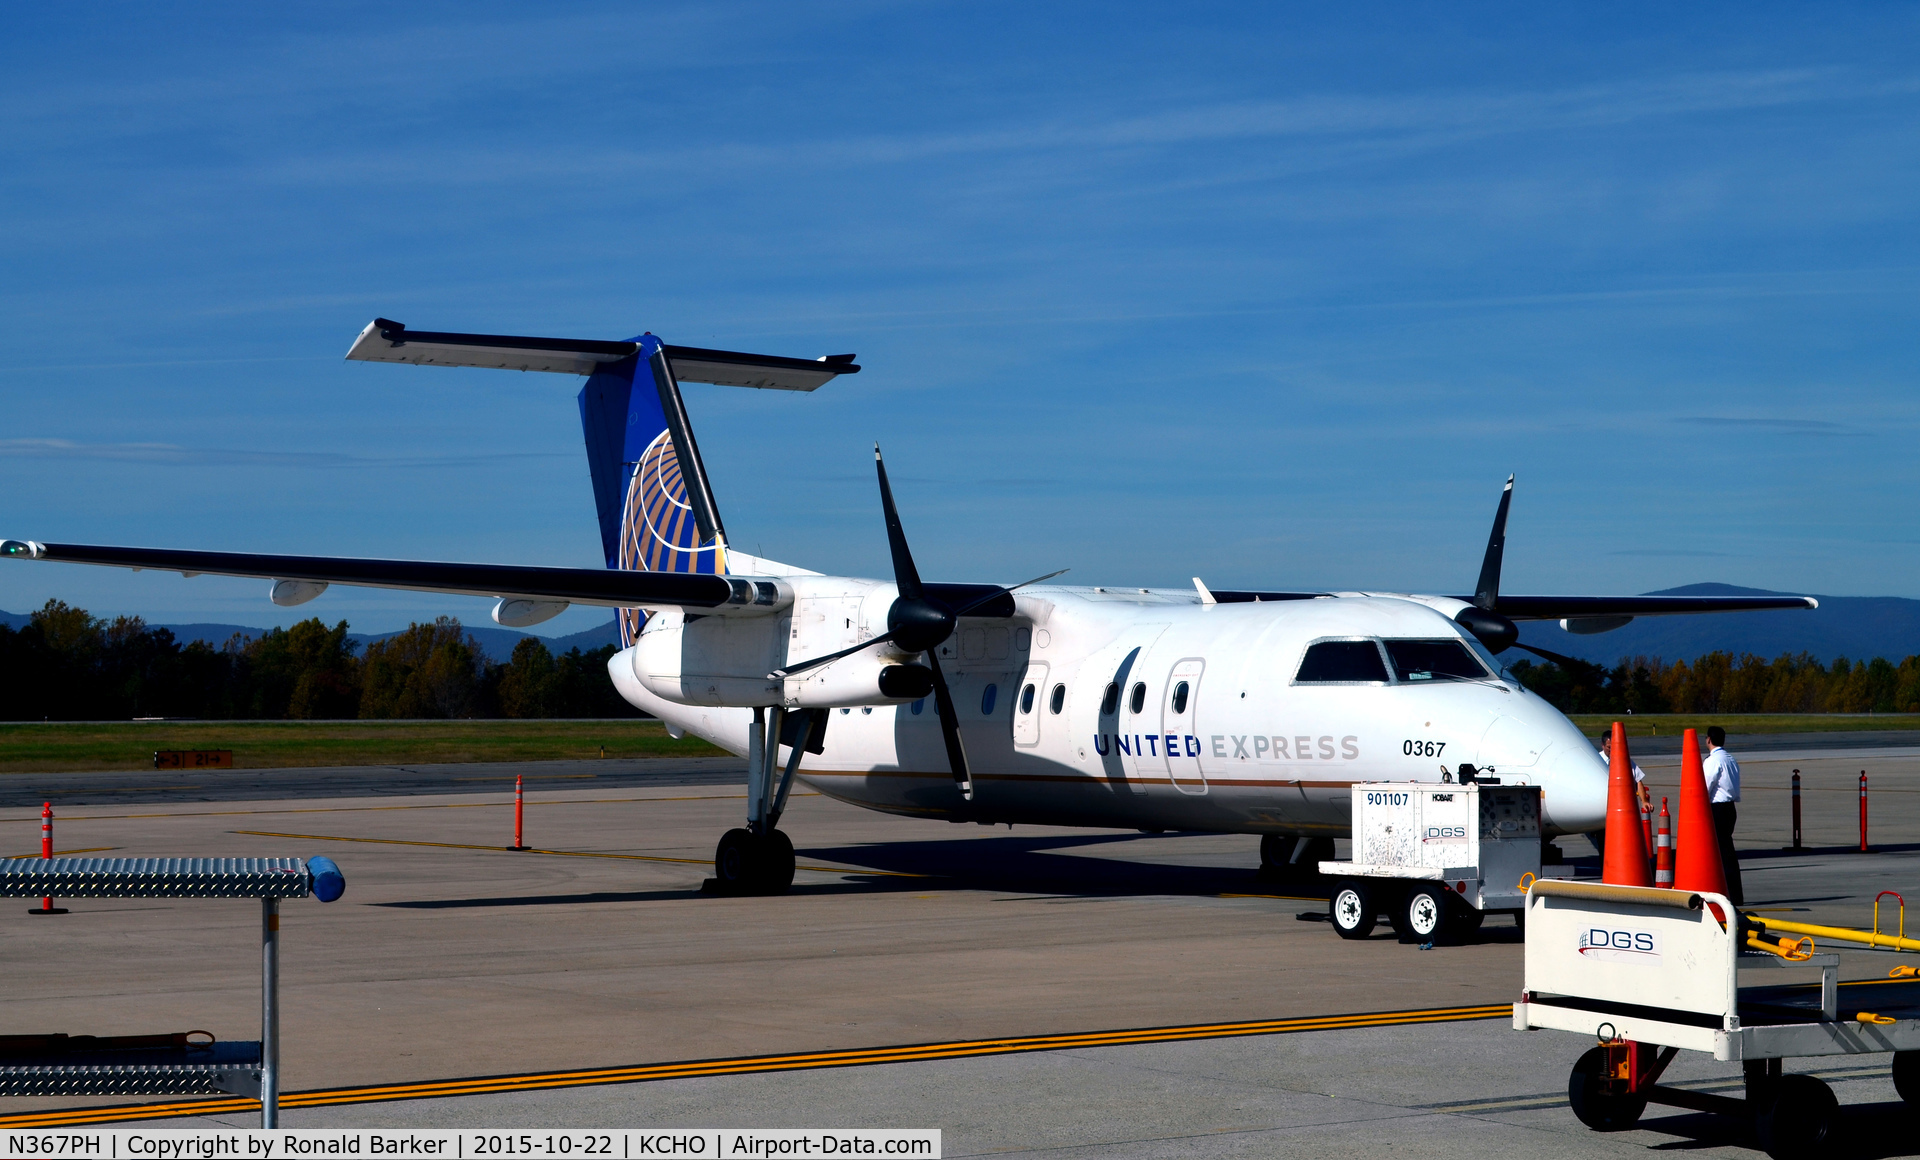 N367PH, 1998 Bombardier DHC-8-202 Dash 8 C/N 511, At the gate Charlottesville